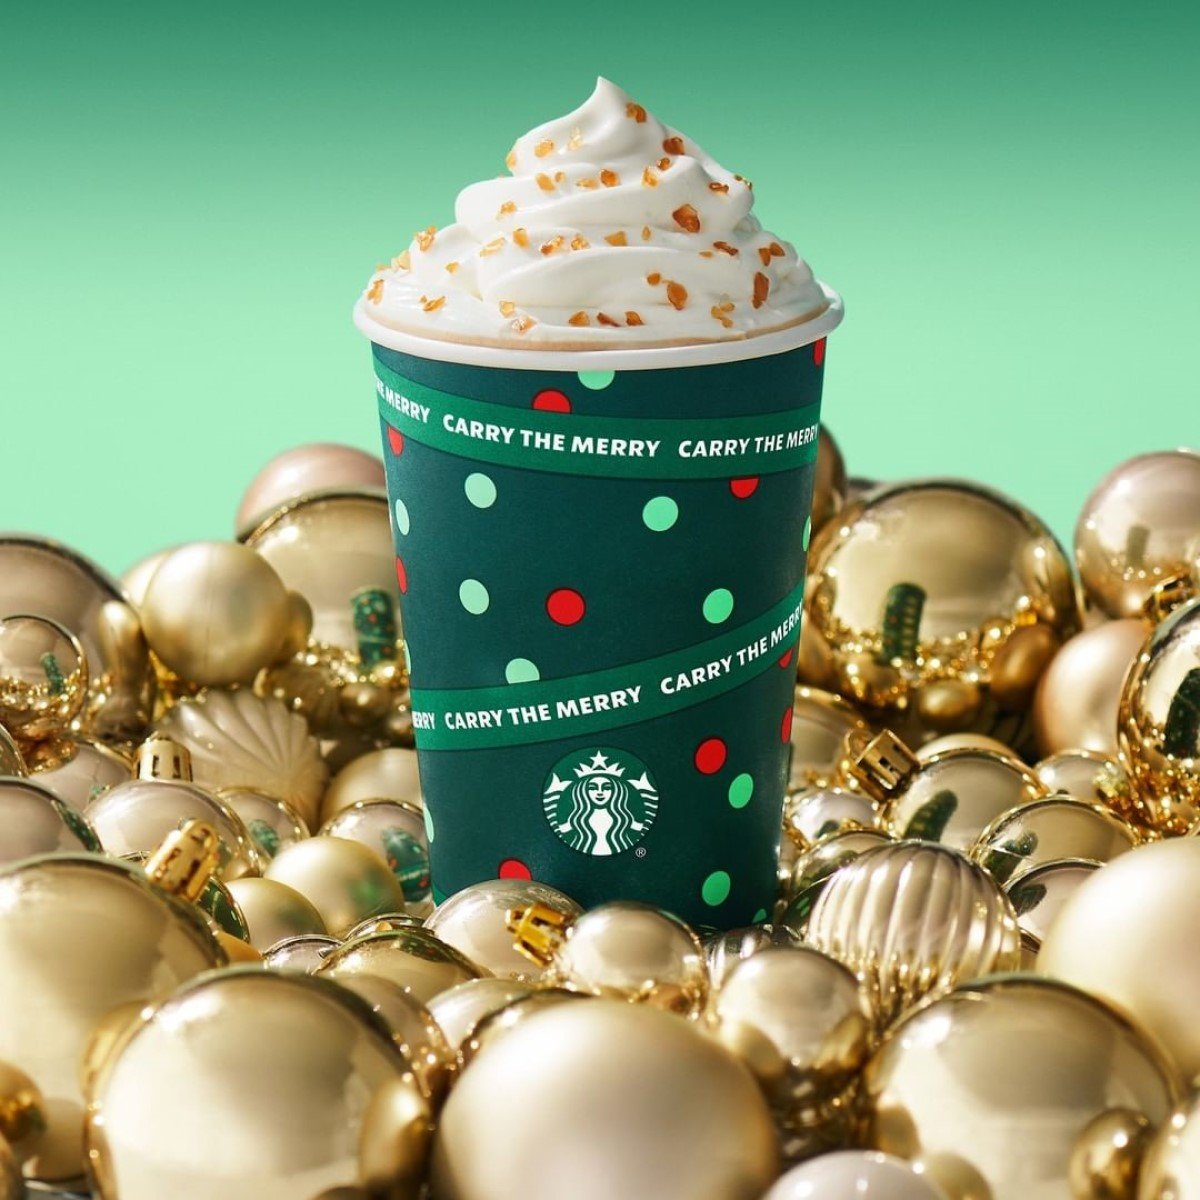 starbucks caramel brulee latte in green christmas paper cup surrounded by golden christmas balls decor